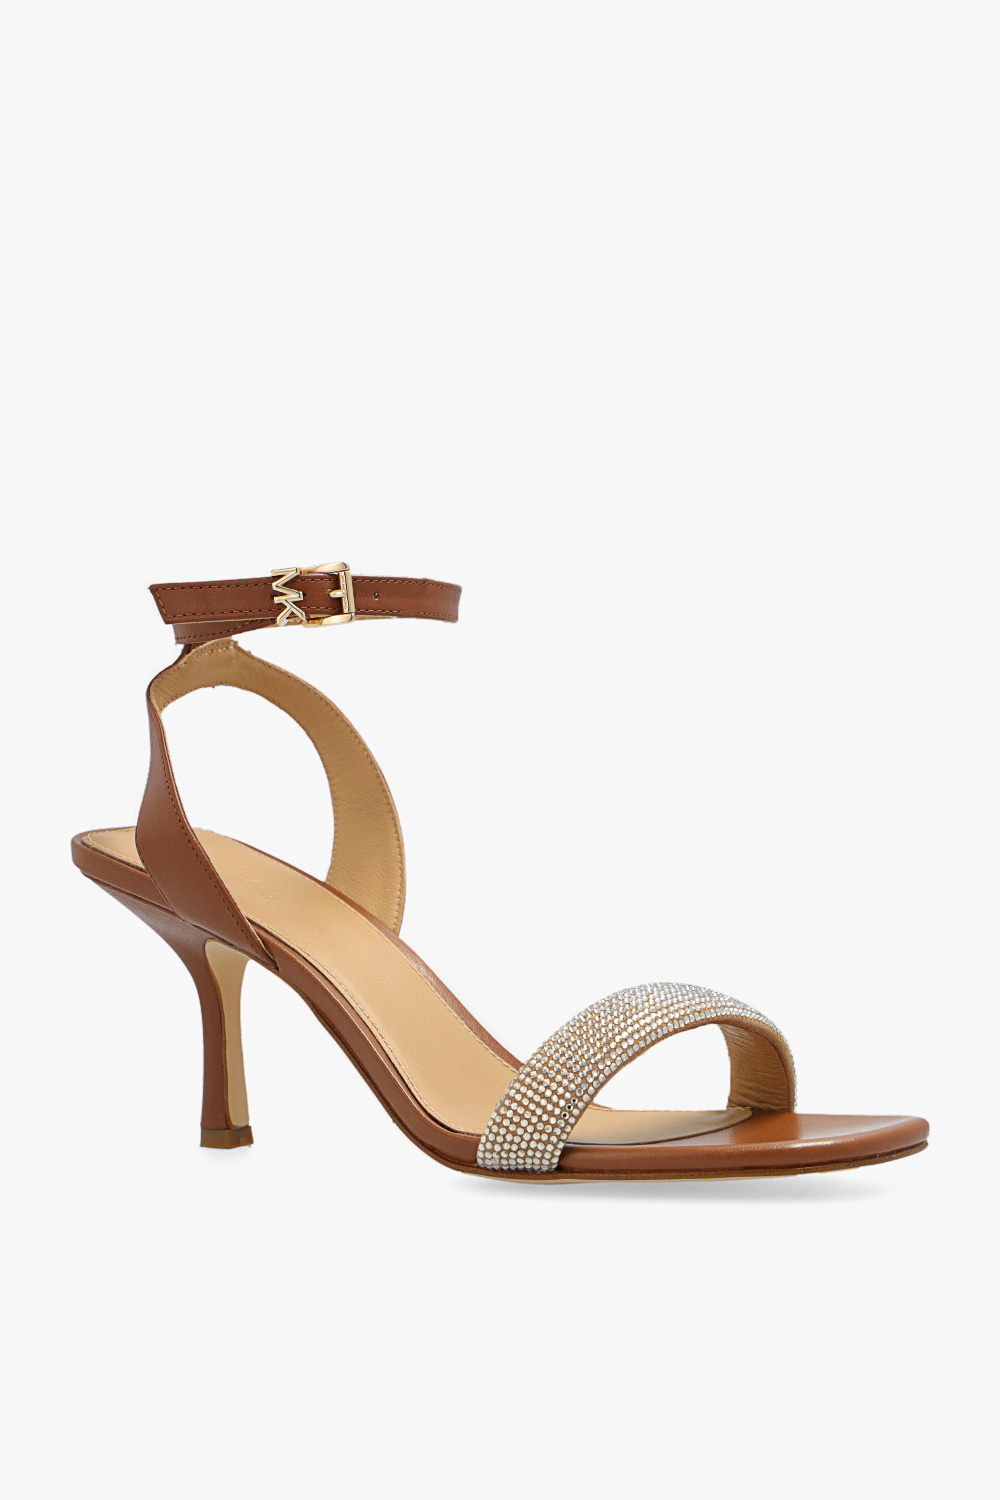 IetpShops Turkey - These shoes are wicked cool - 'Carrie' heeled sandals  Michael Michael Kors